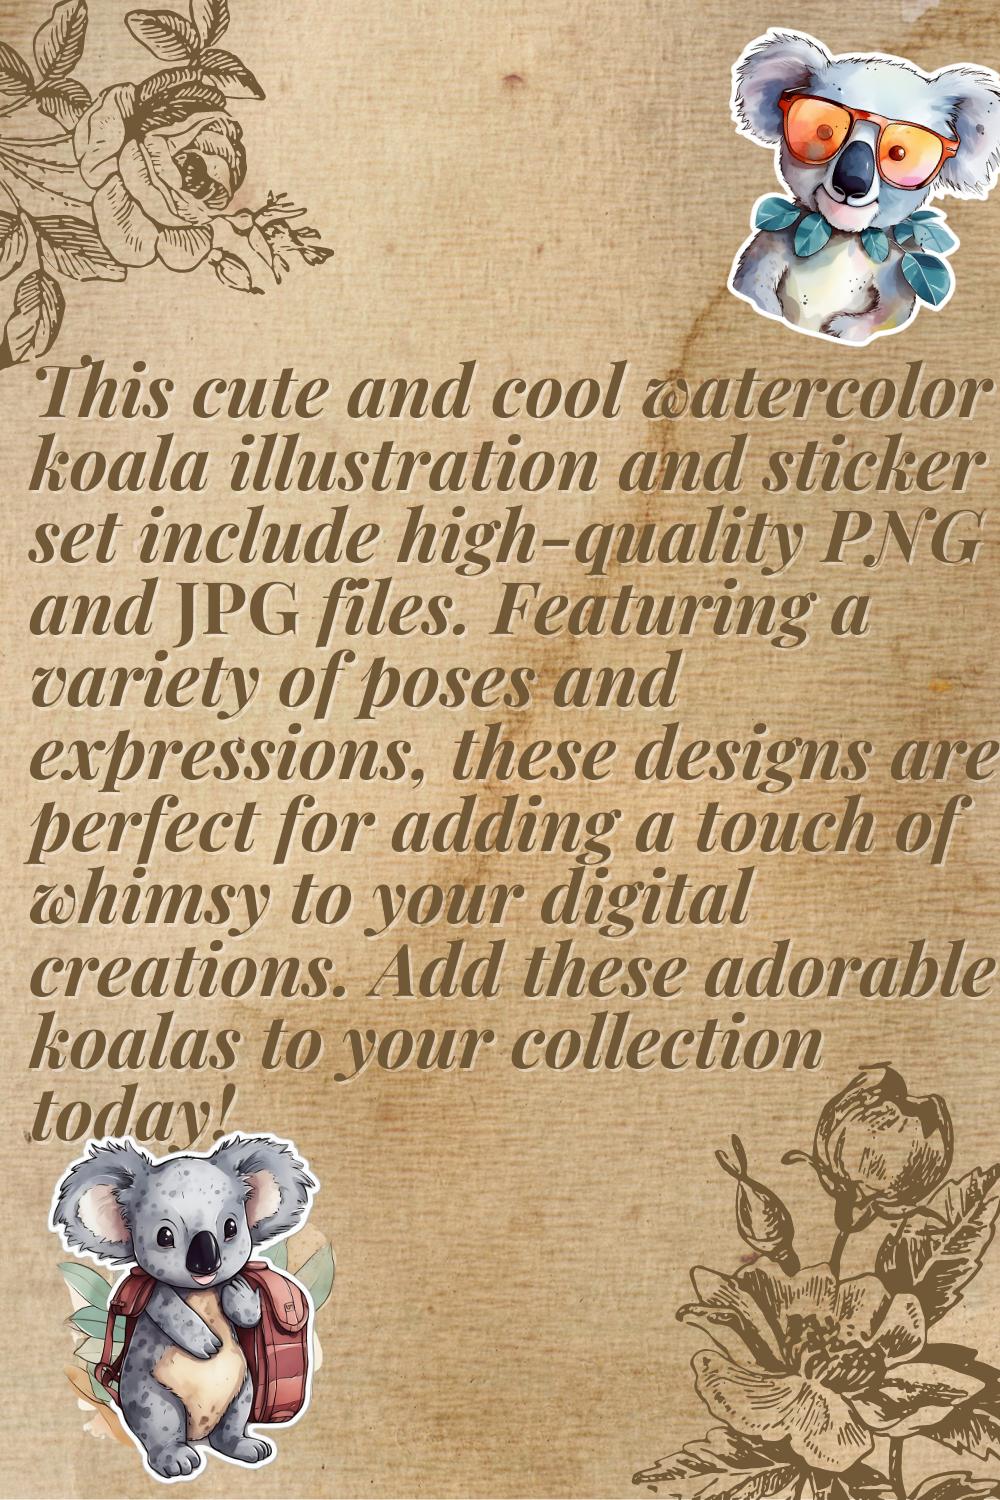 "Koalas in Watercolor: A Collection of Cute and Cool Stickers and Illustrations" pinterest preview image.